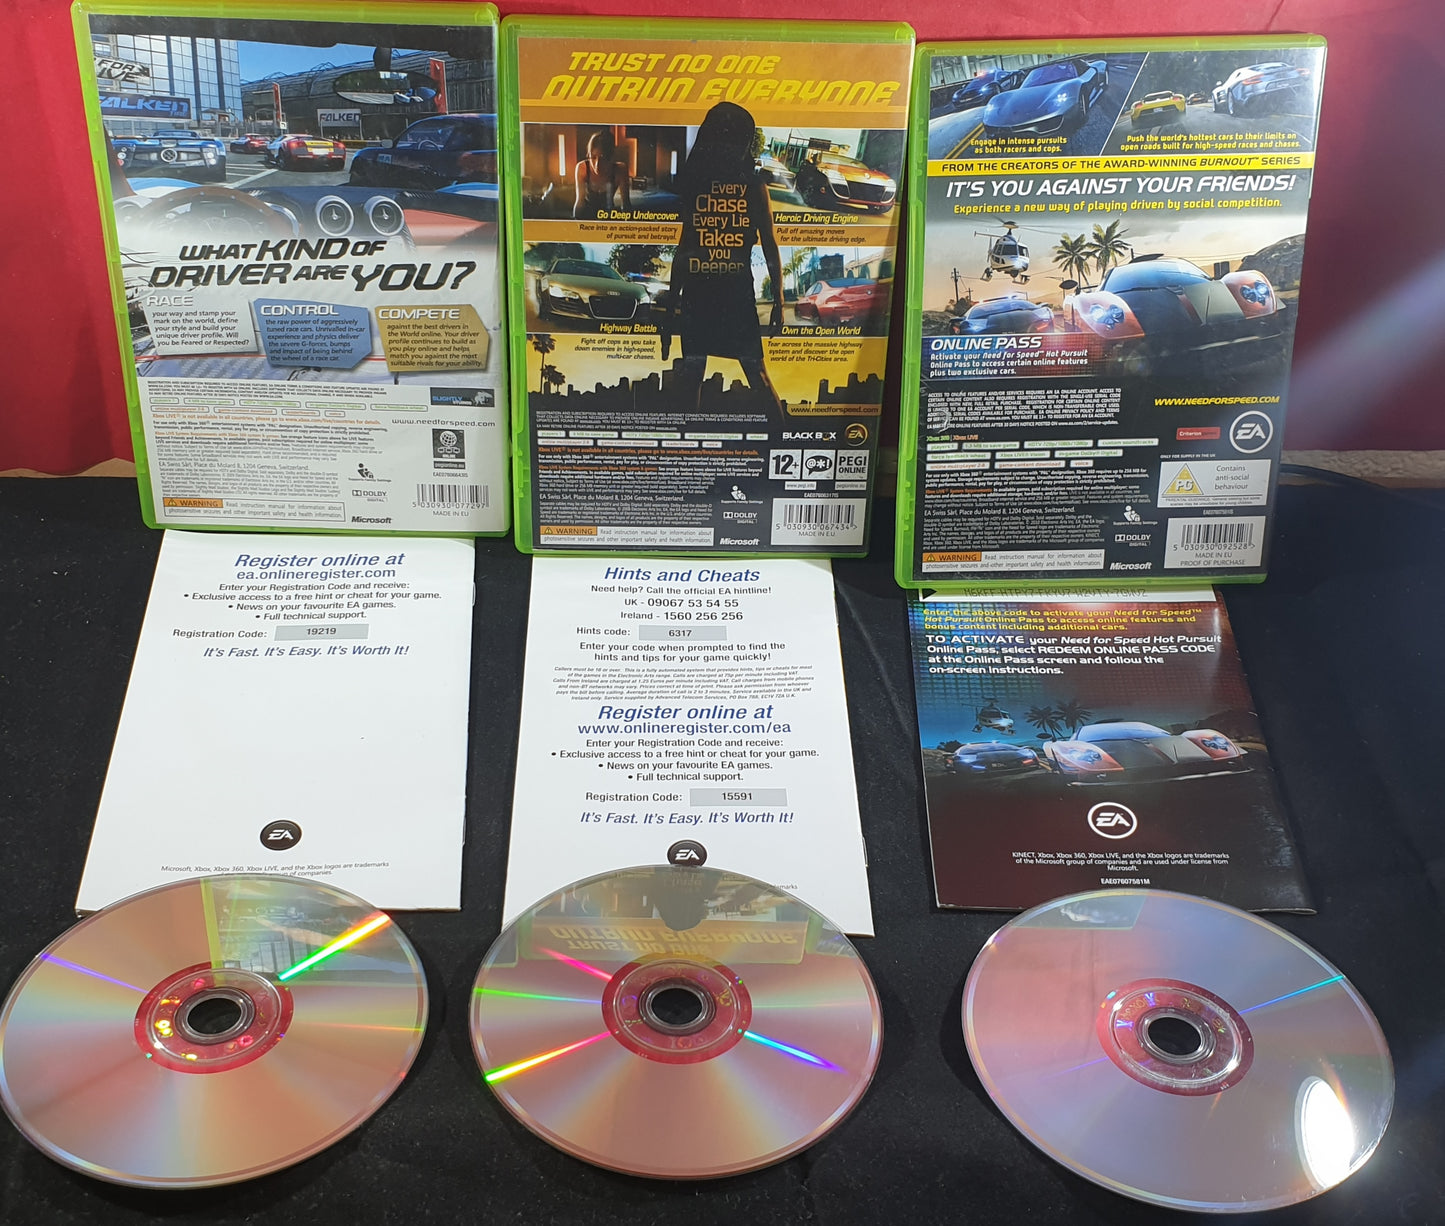 Need for Speed Undercover, Hot Pursuit & Shift Microsoft Xbox 360 Game Bundle